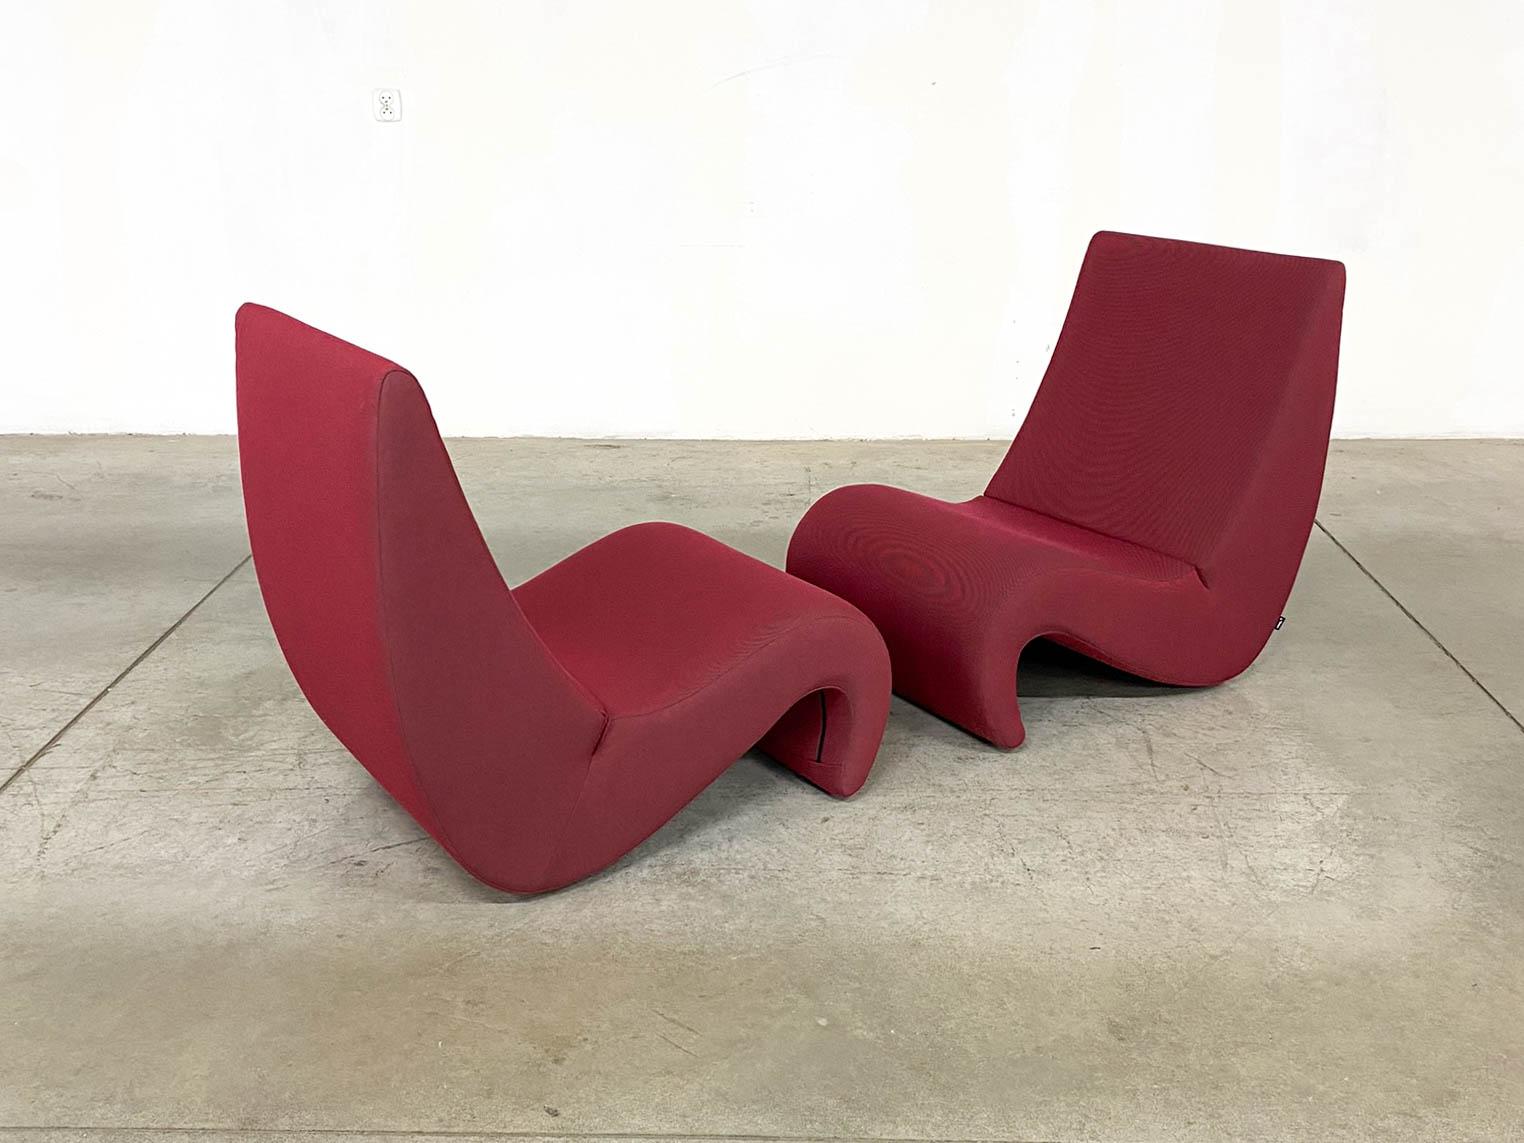 20th Century Amoebe Lounge Chair by Verner Panton for Vitra, 2000s For Sale